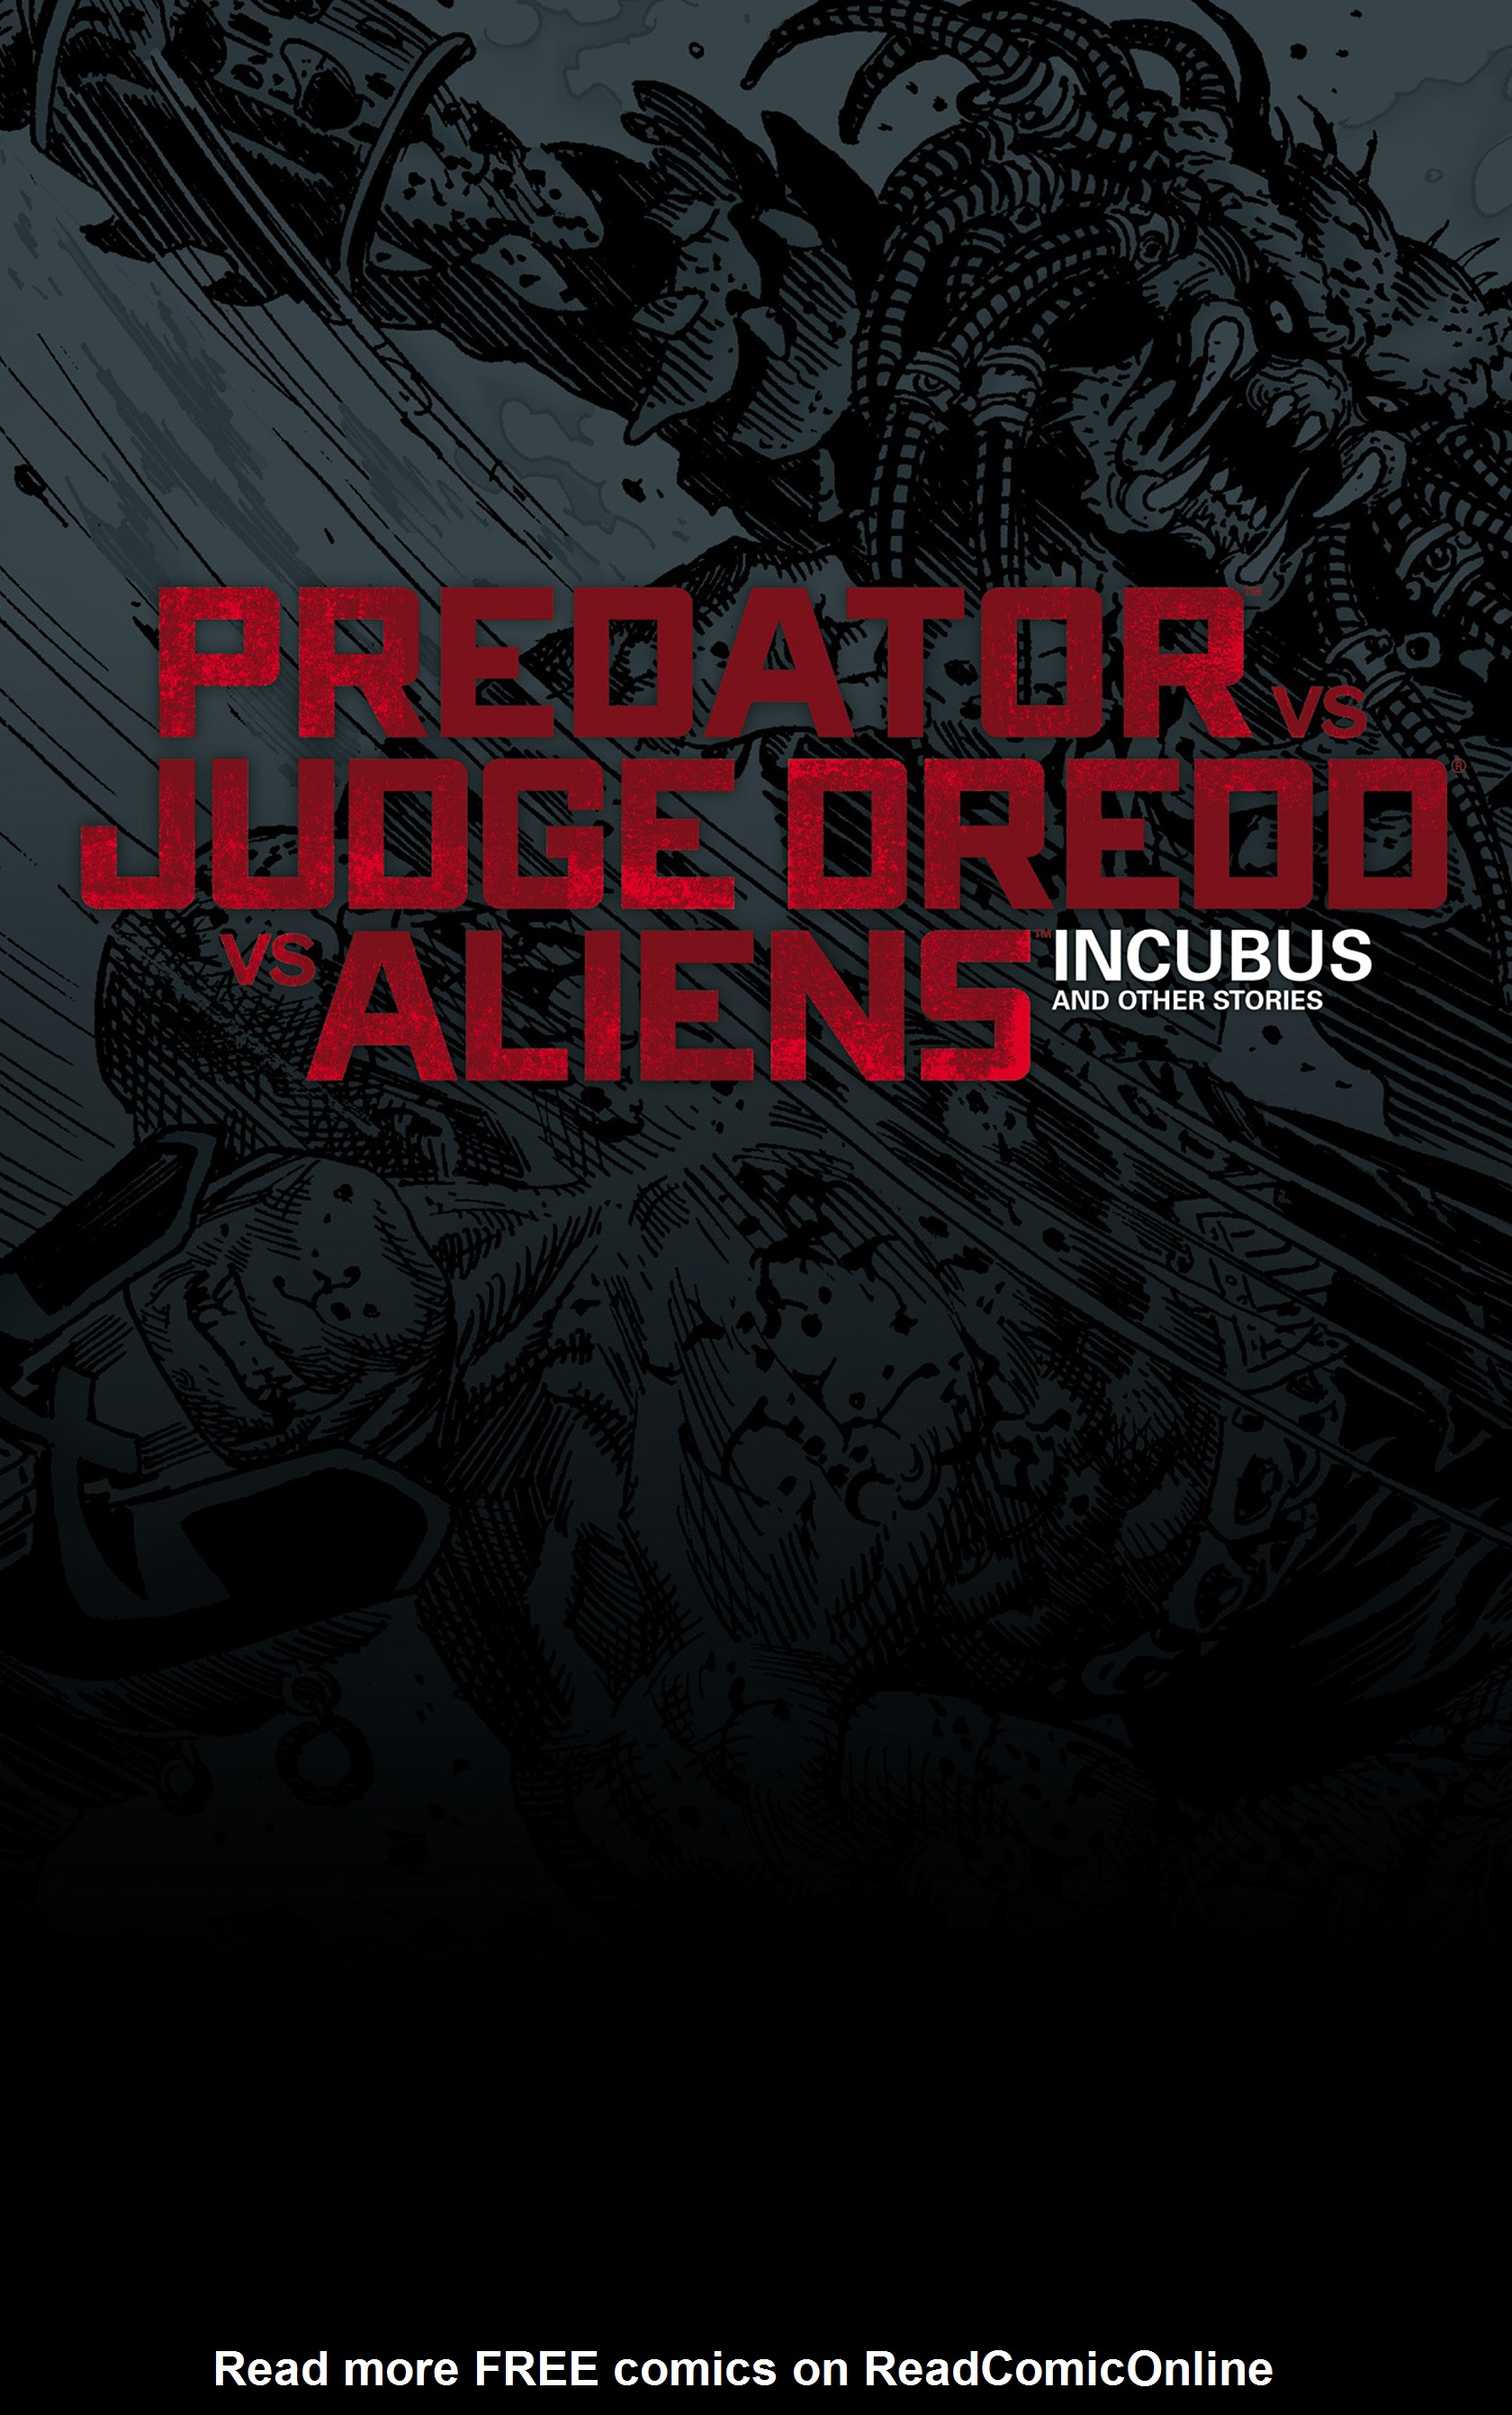 Read online Predator vs. Judge Dredd vs. Aliens: Incubus and Other Stories comic -  Issue # TPB (Part 1) - 2